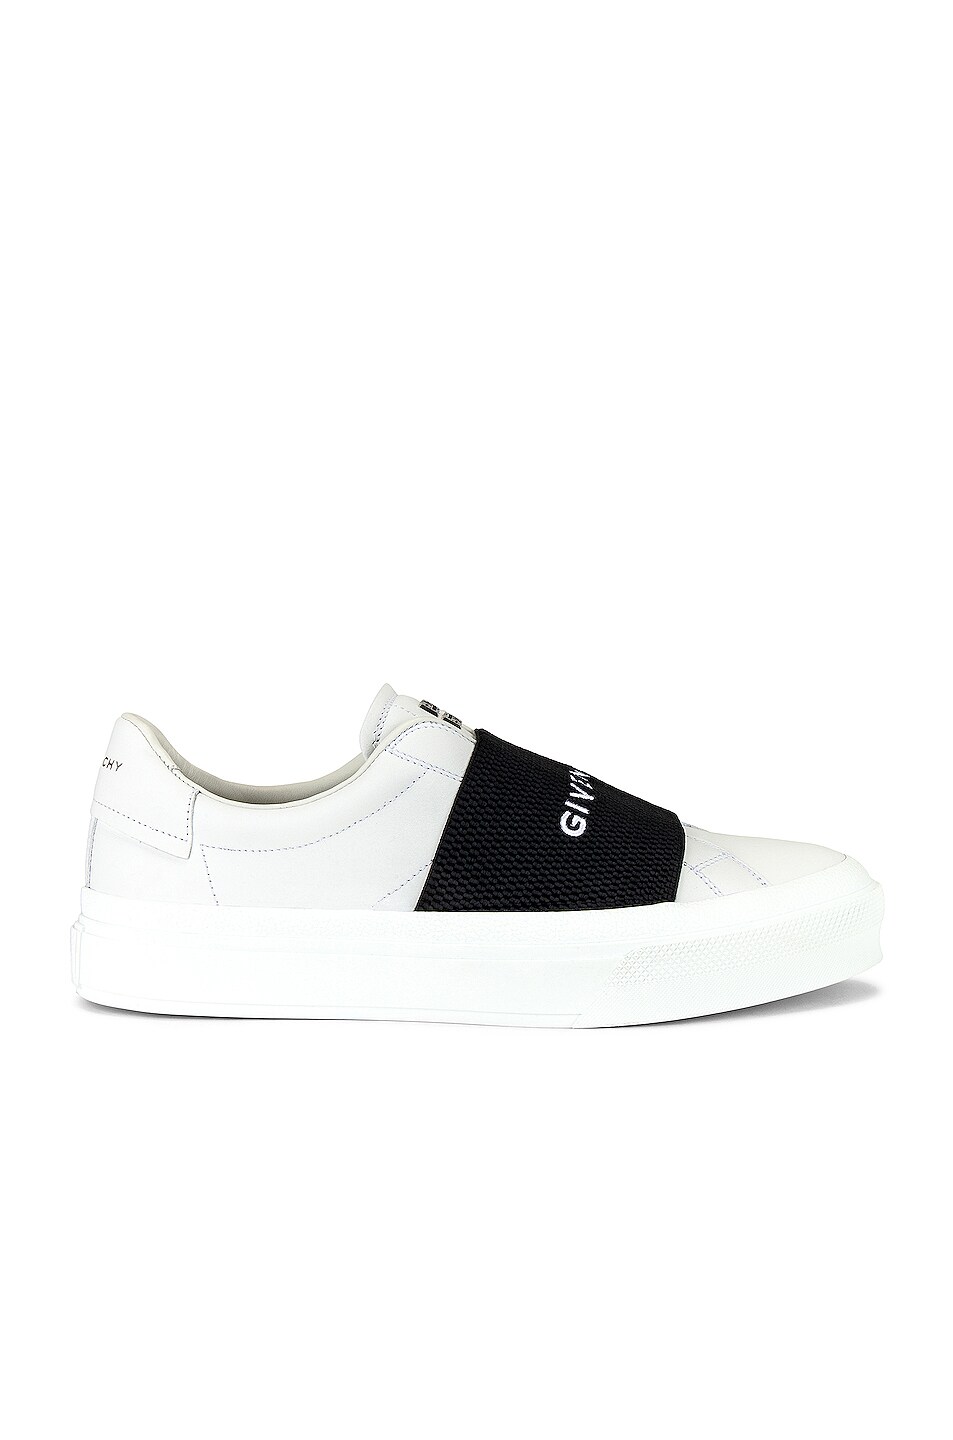 Image 1 of Givenchy Elastic City Court Sneaker in White & Black